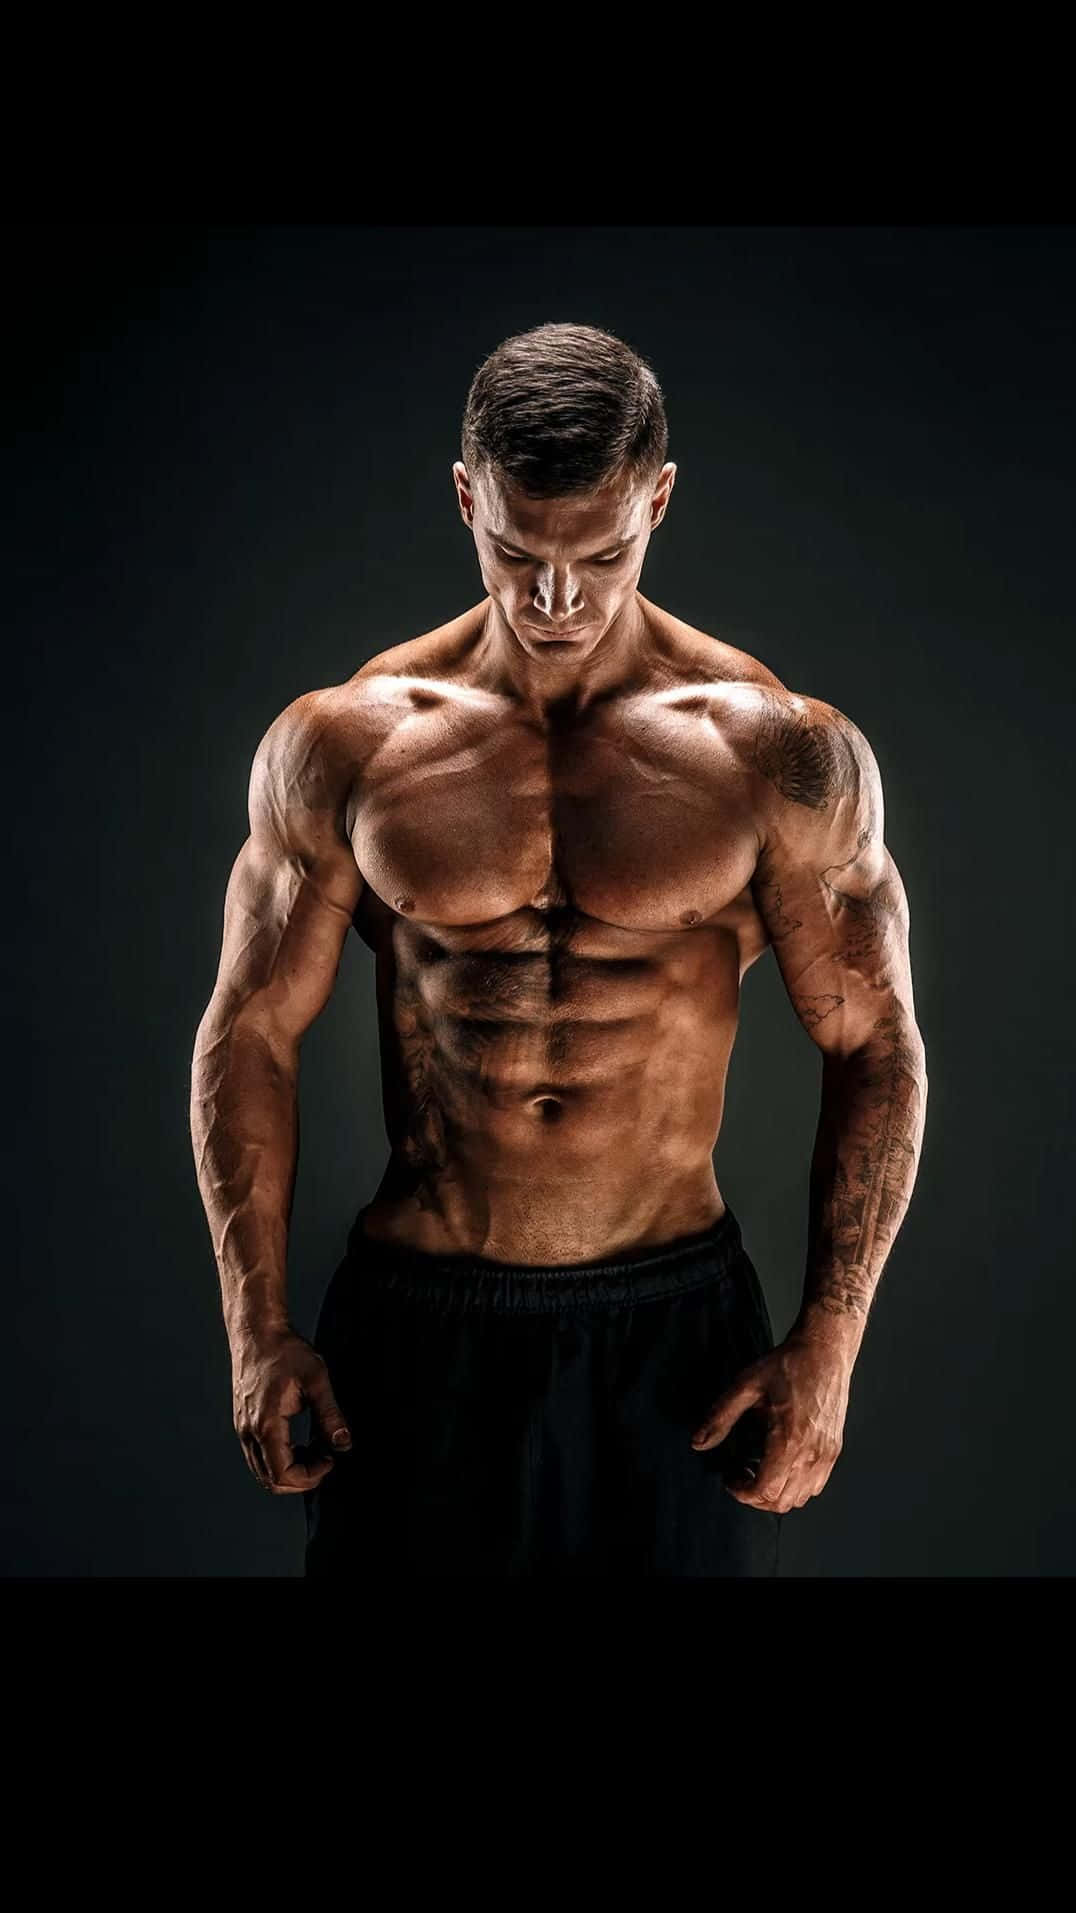 A Man With A Muscular Body Posing In Front Of A Dark Background Wallpaper